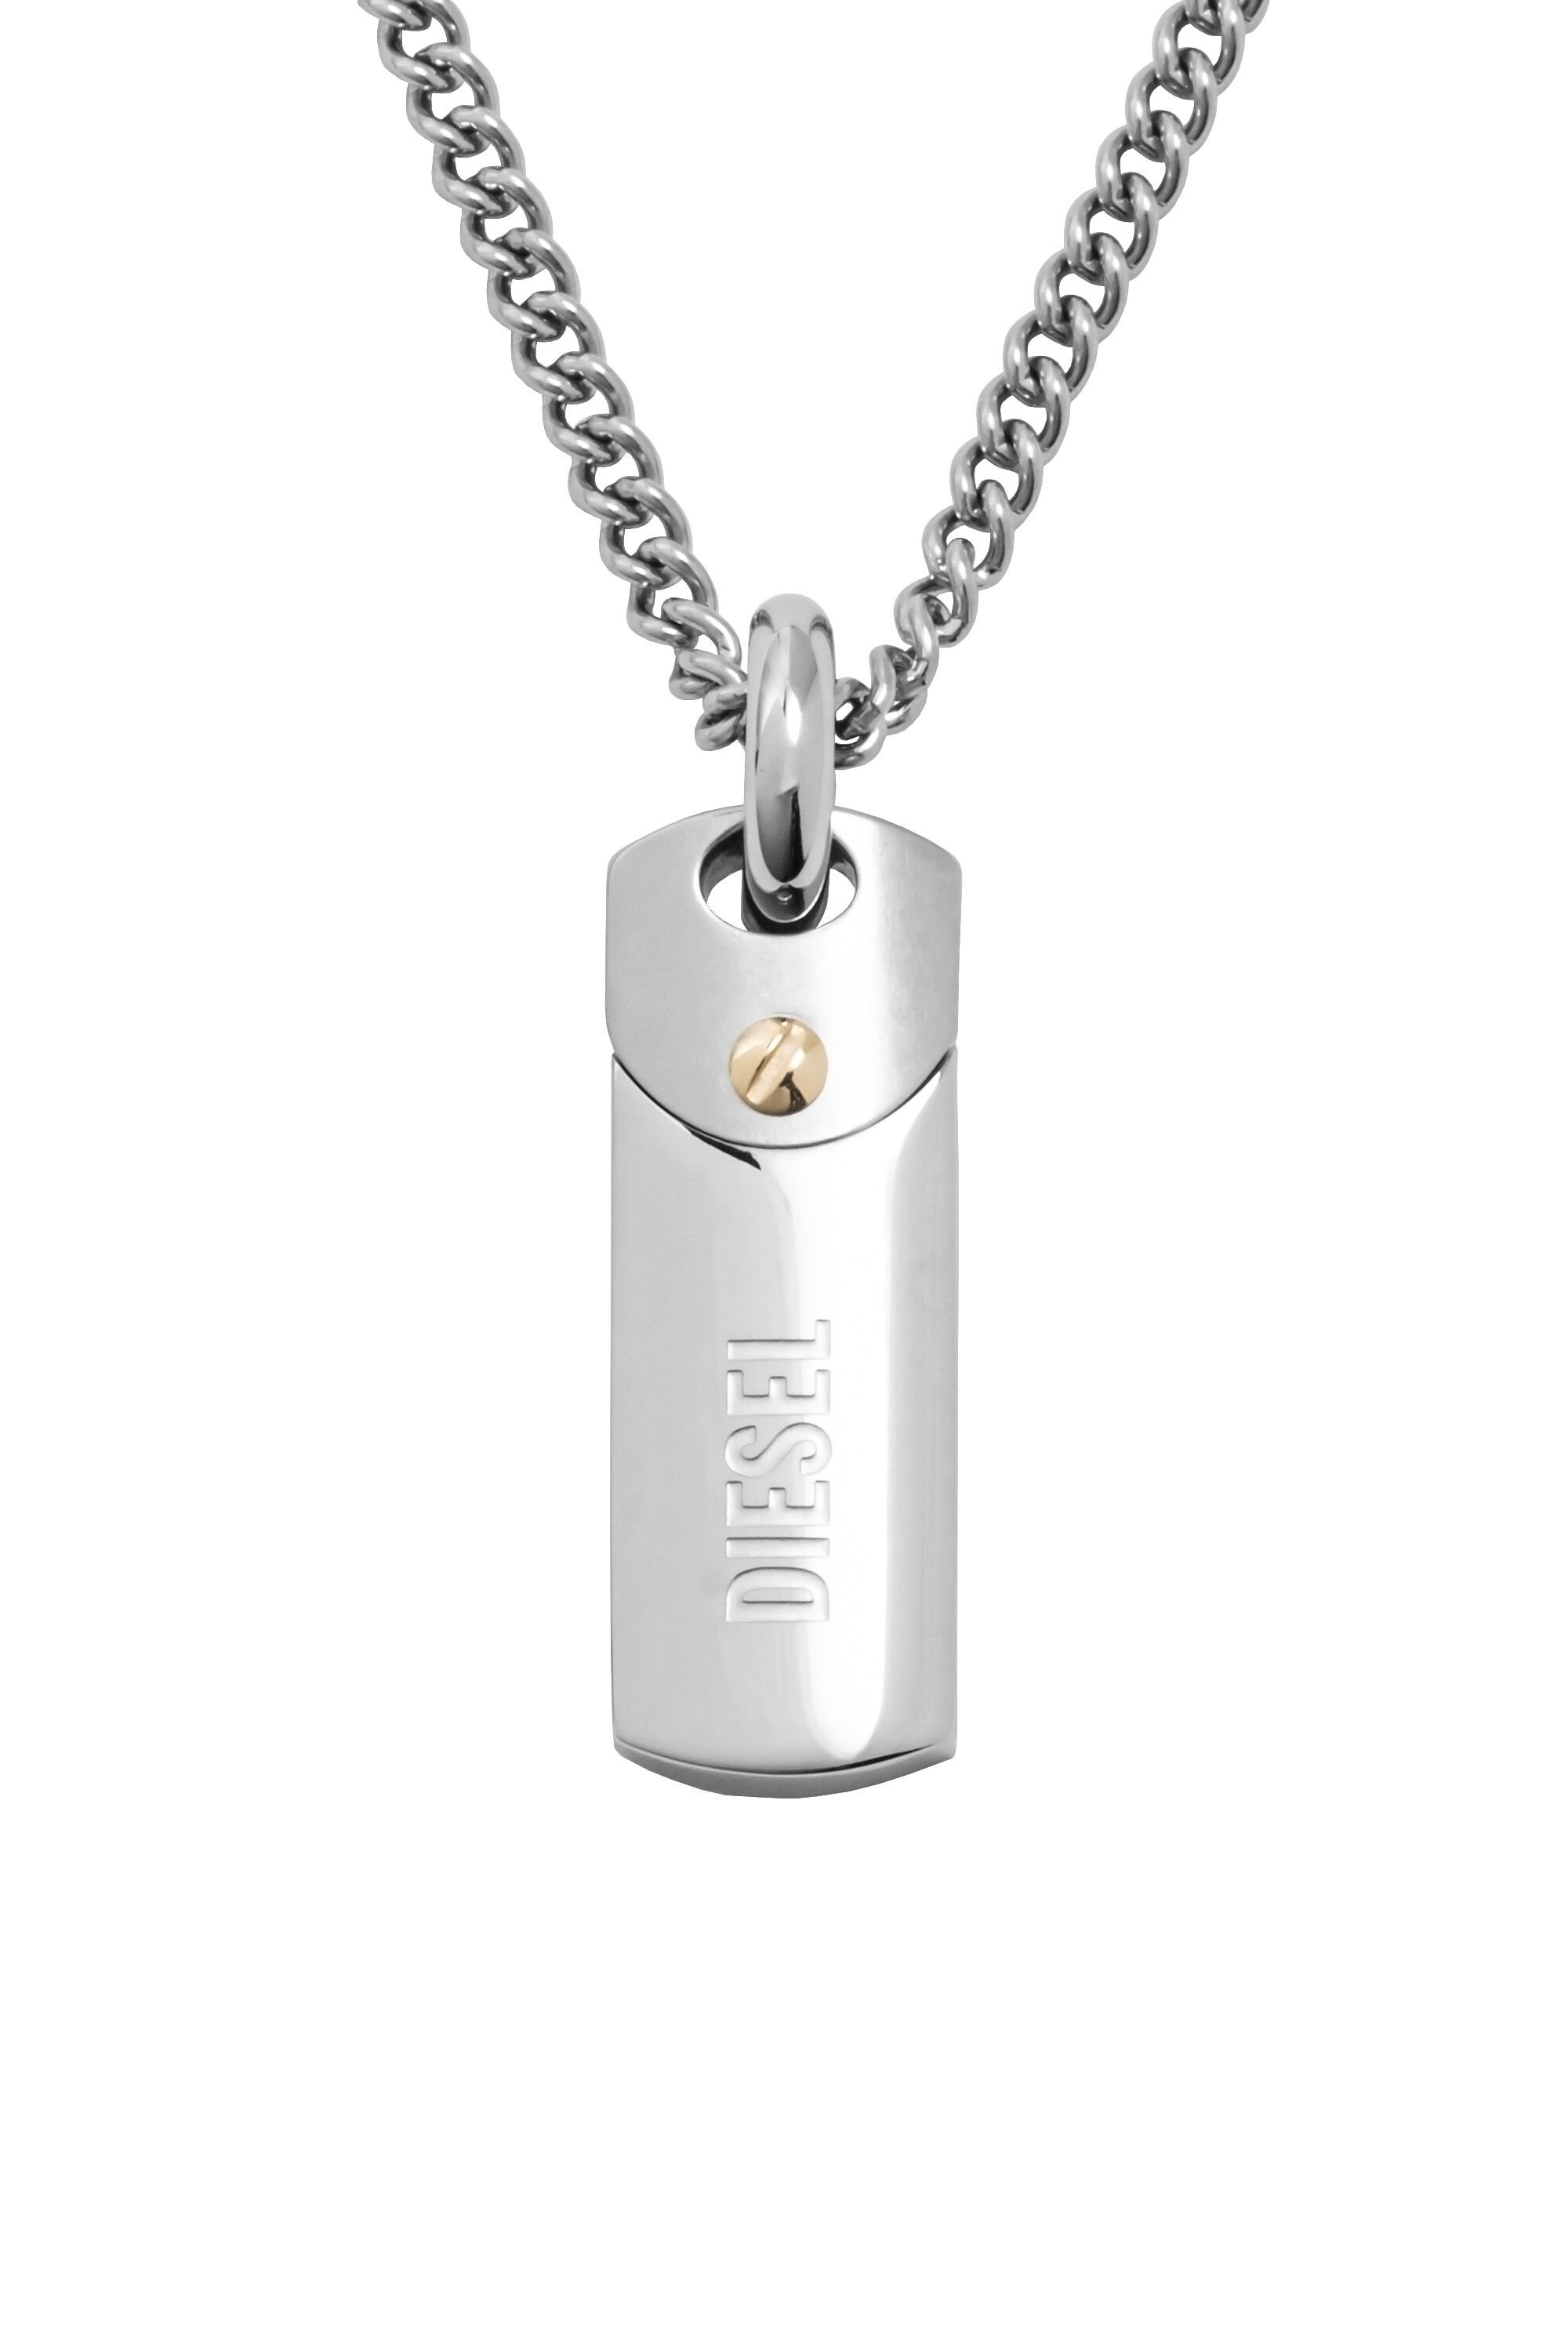 Diesel - DX1116, Man Steel dog tag pendant necklace in Silver - Image 3